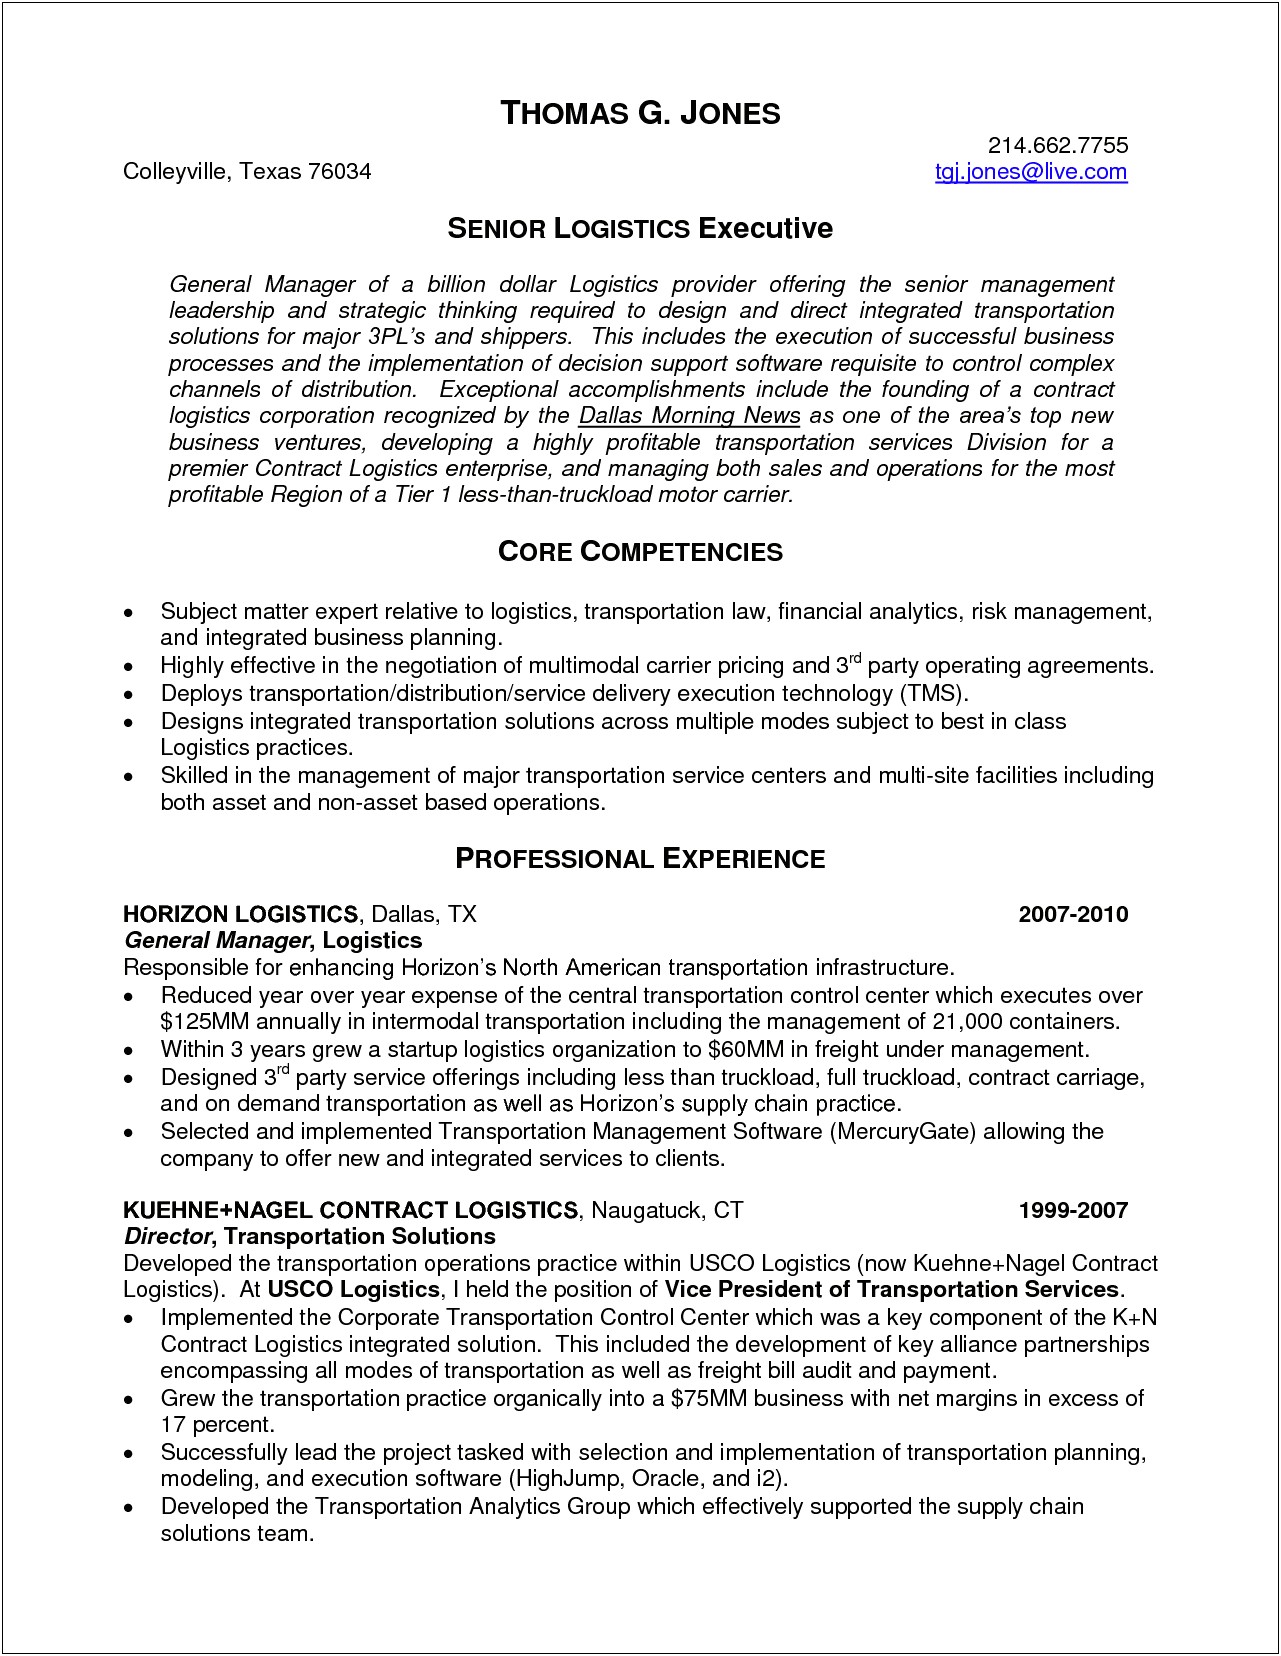 Resume Objective Freight Manager Examples